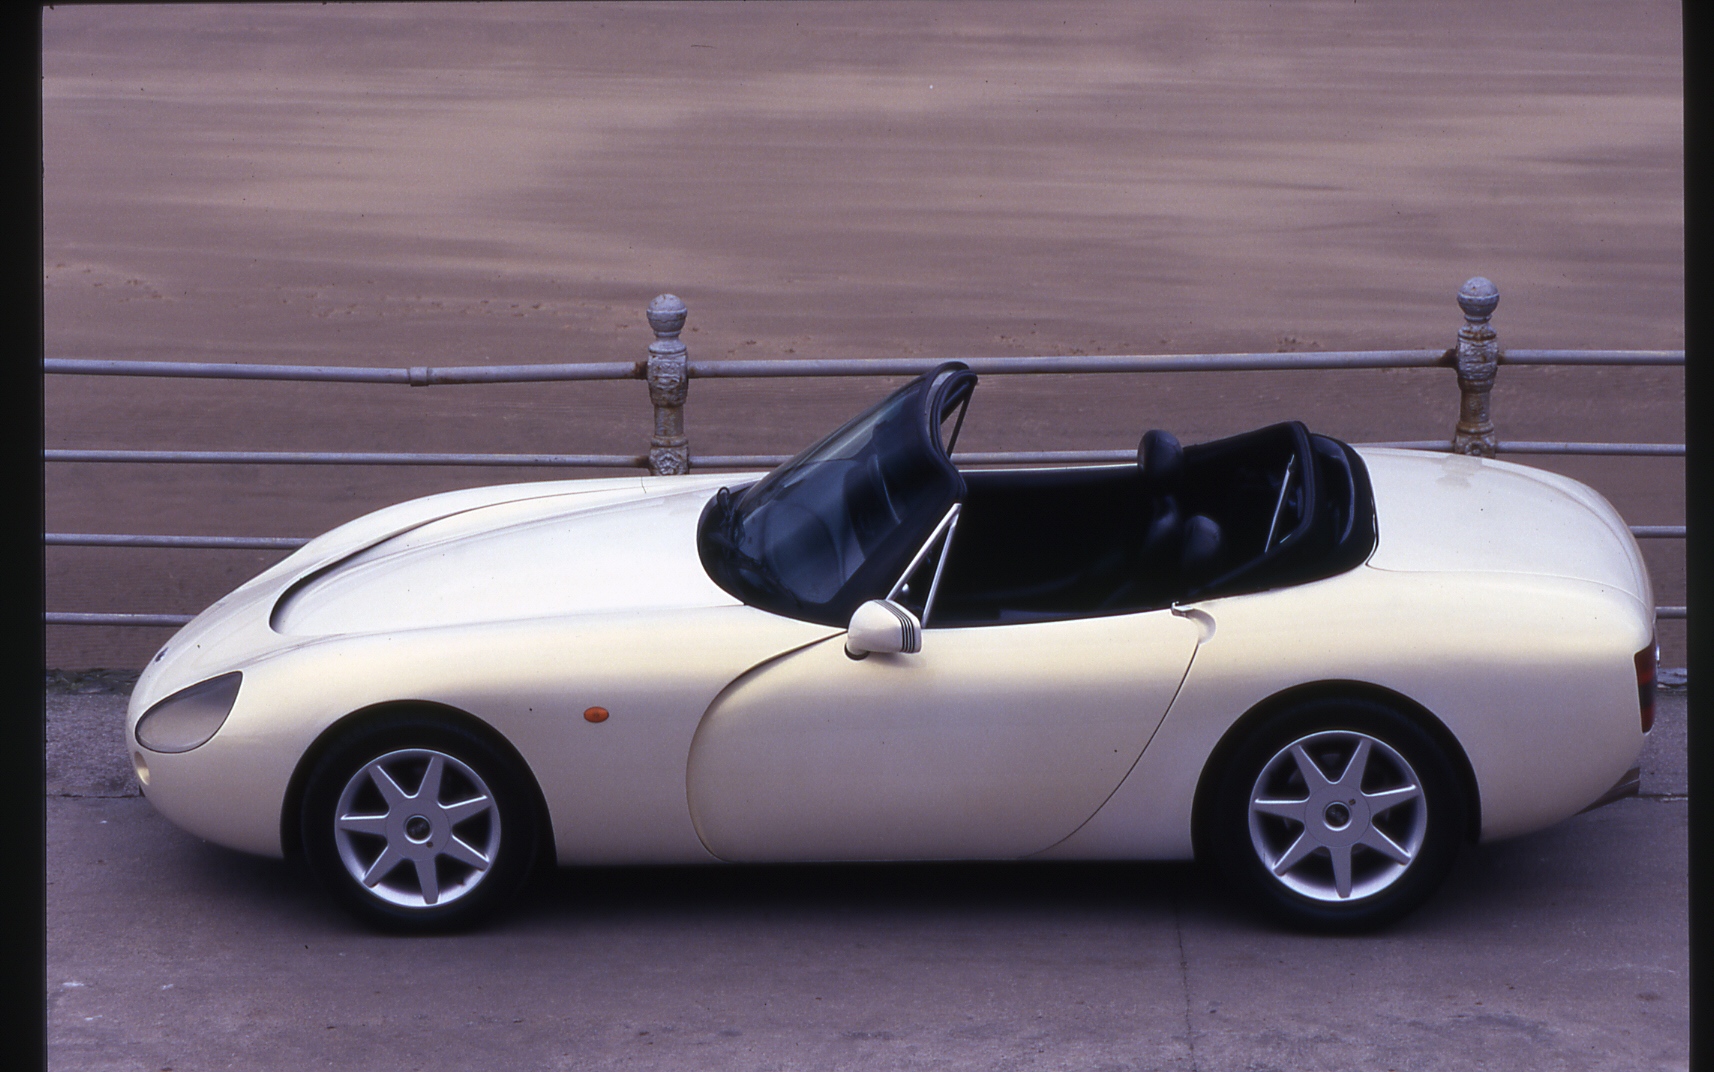 TVR, TVR Griffith, Griffith buying guide, Griffith side